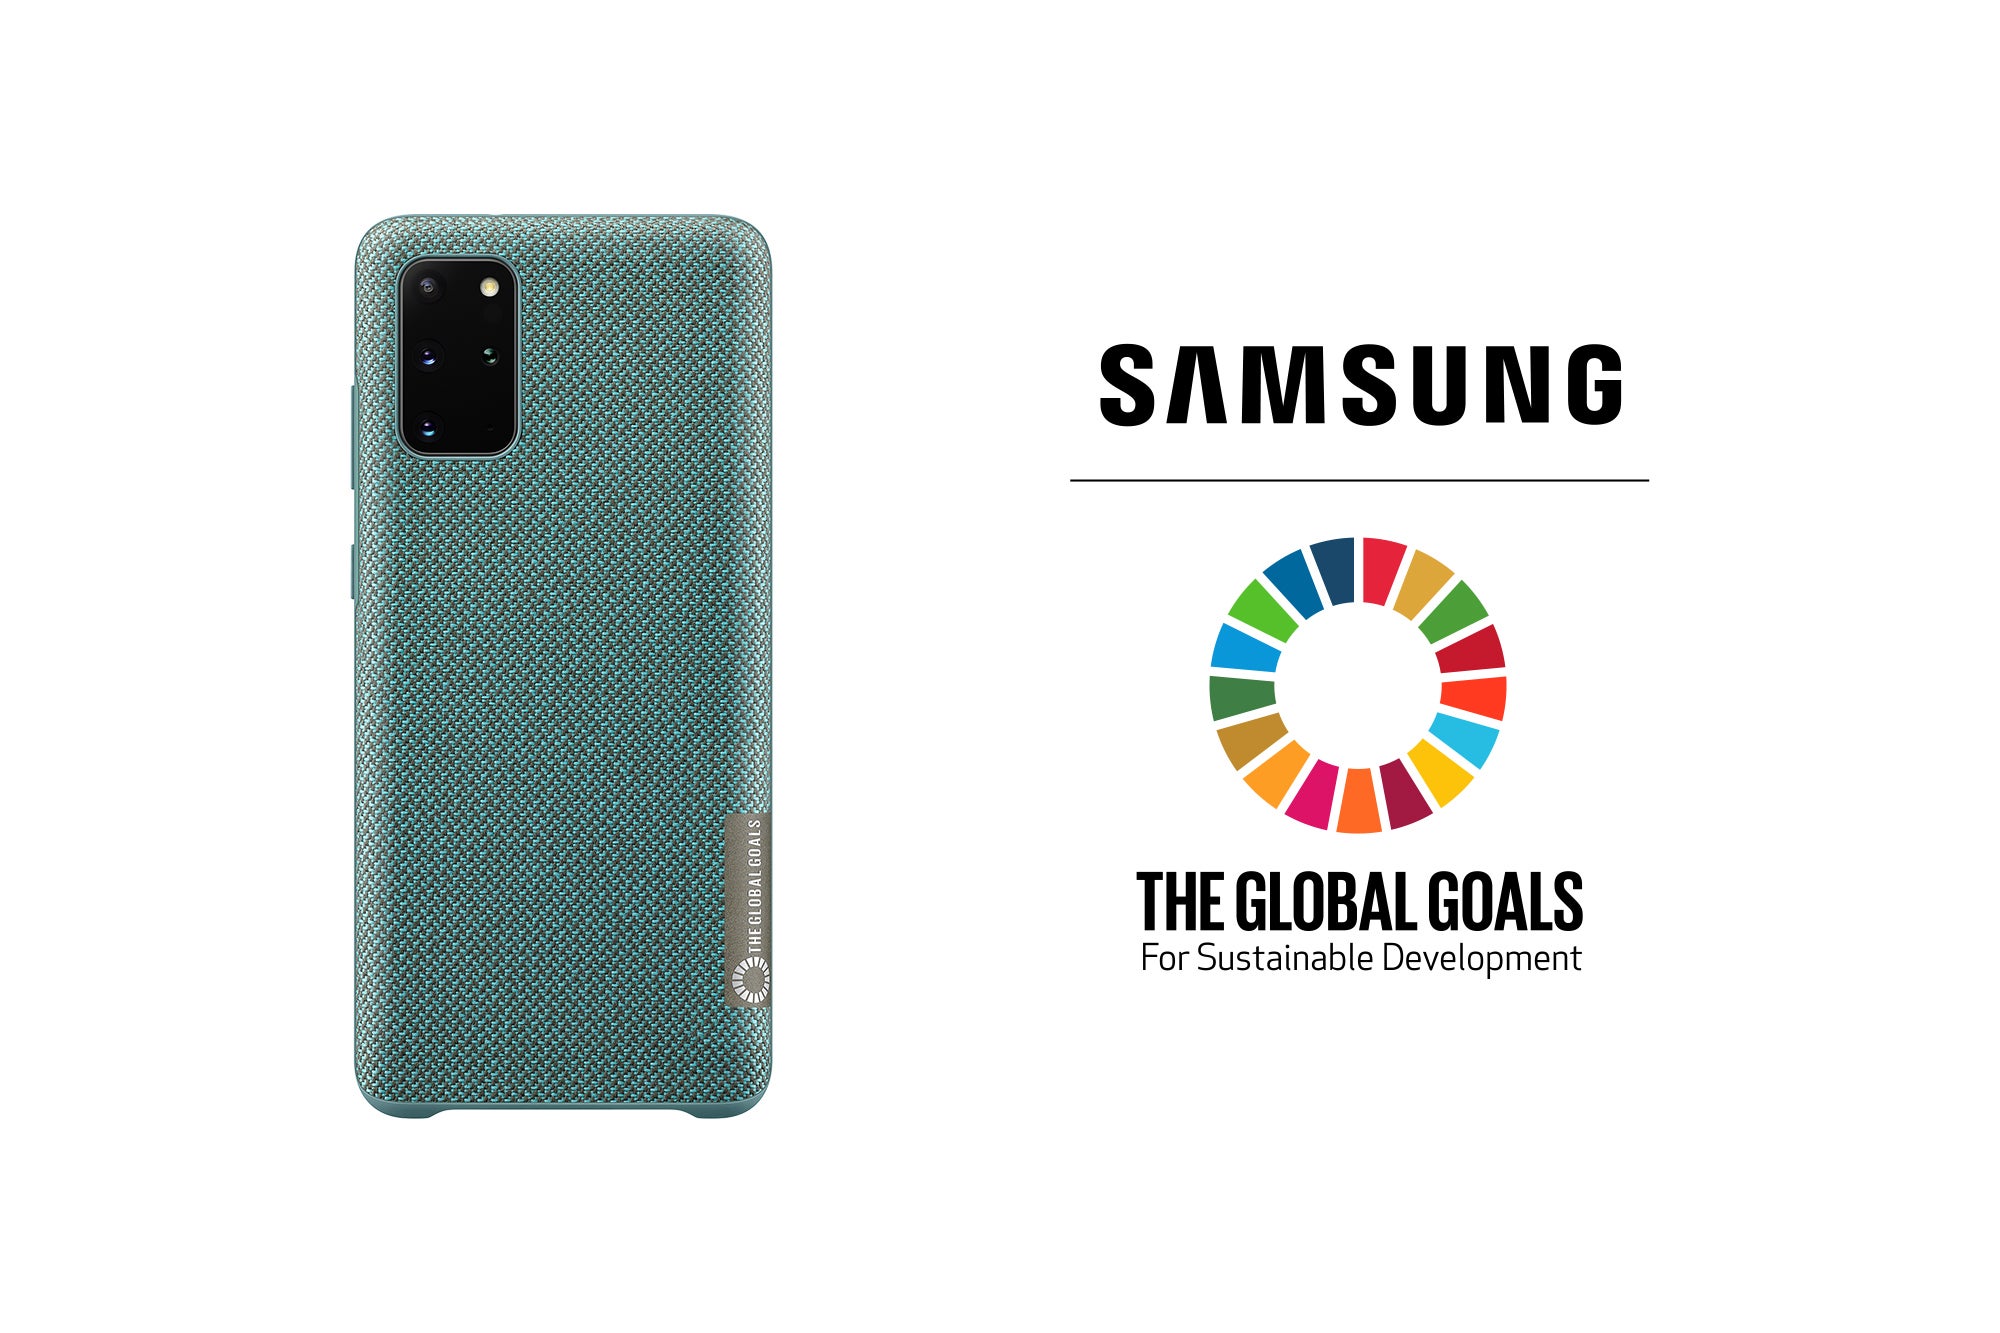 Global Goals edition - Samsung collaborates with premium brand Kvadrat for sustainable Galaxy S20 Plus phone cases